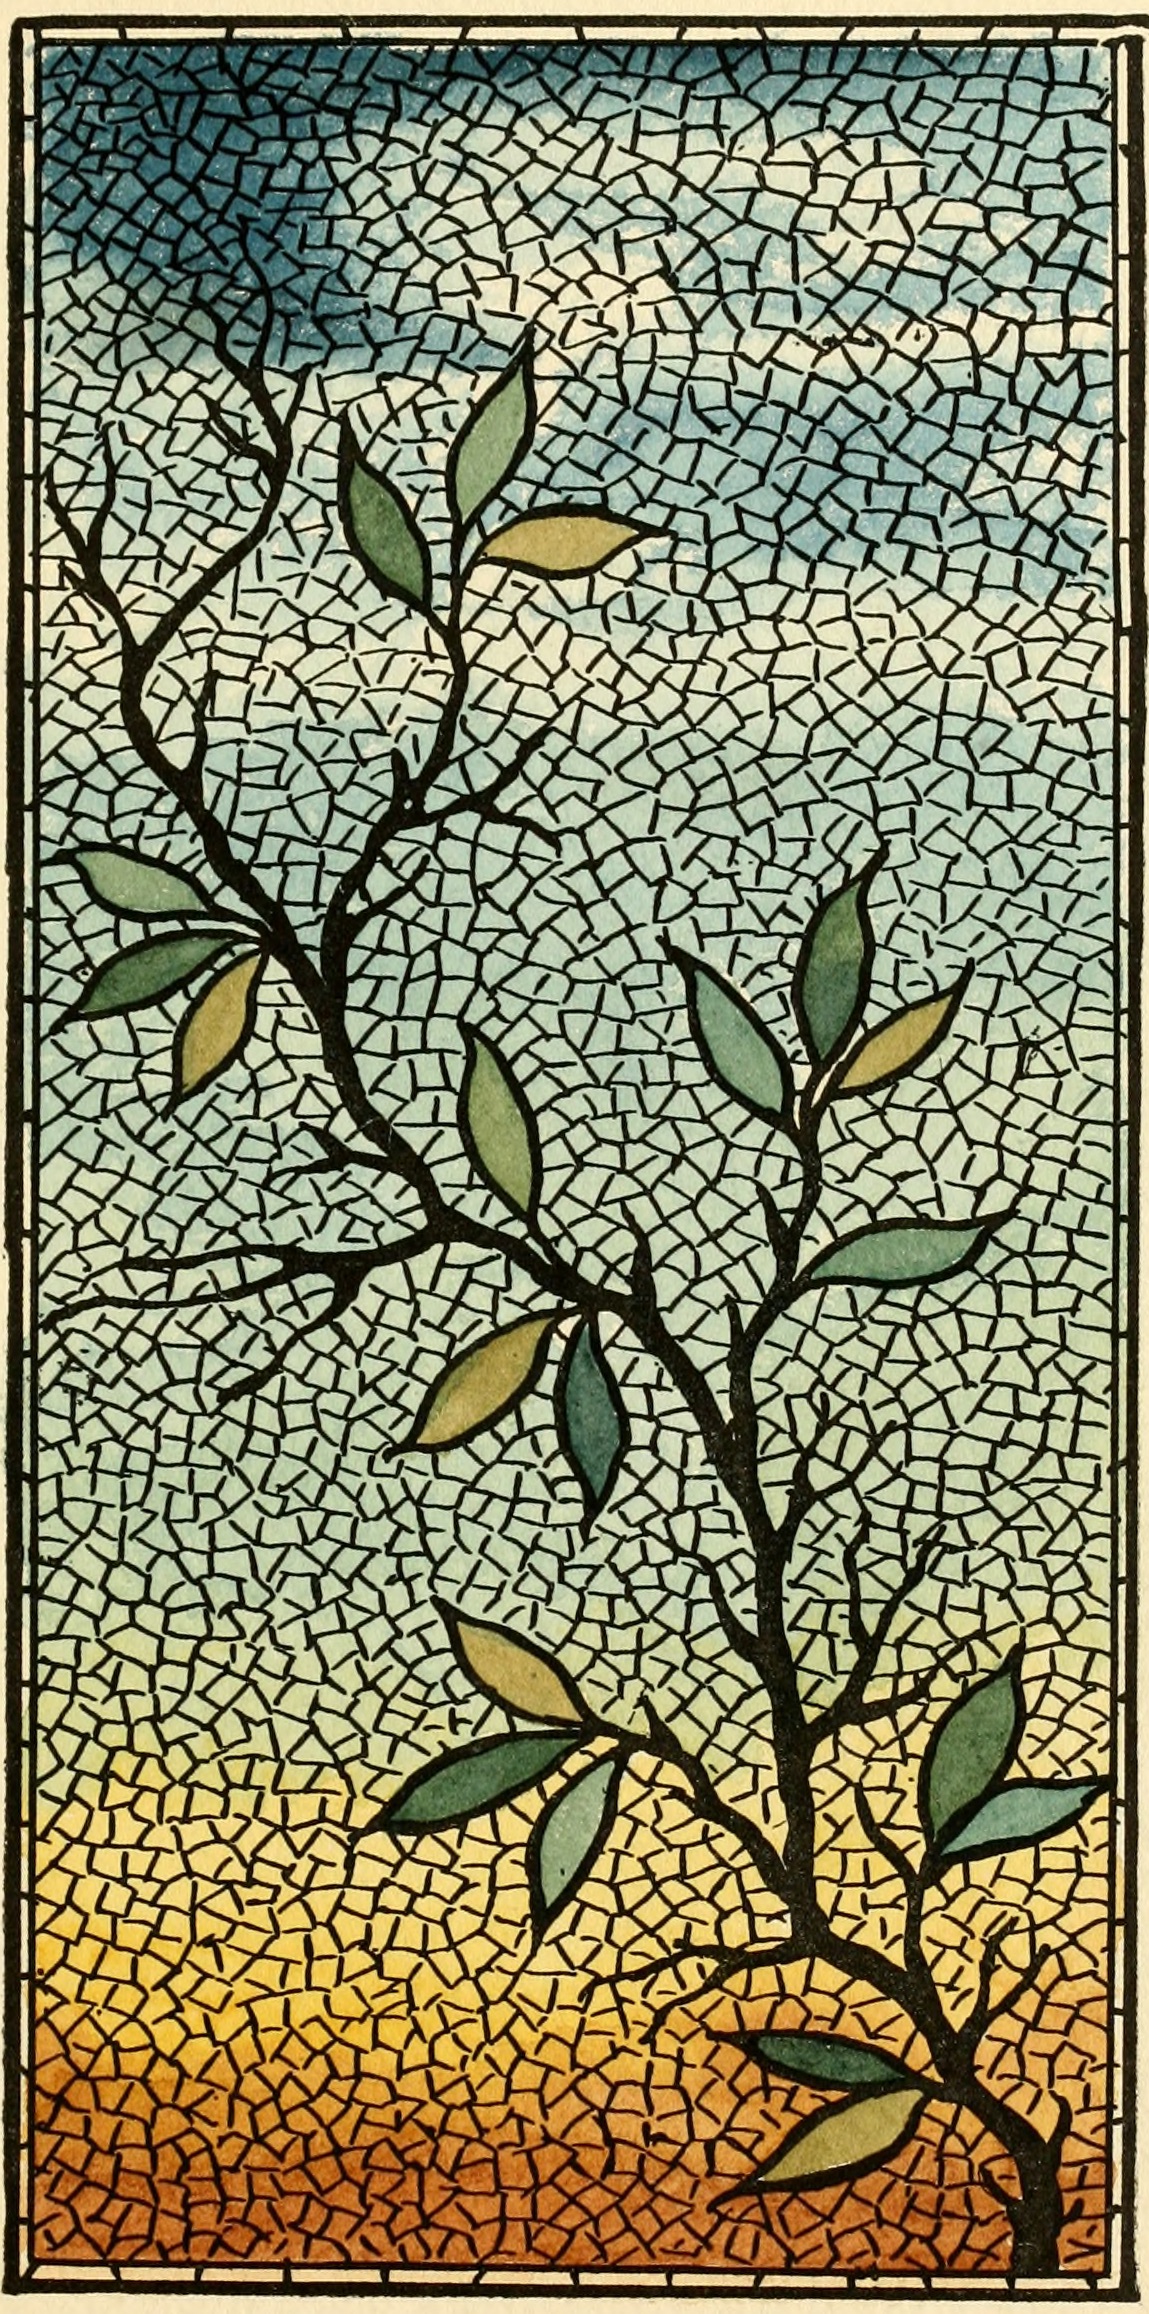 Glass Catalog by Belcher Mosaic Glass Co. New York, N.Y. 1886